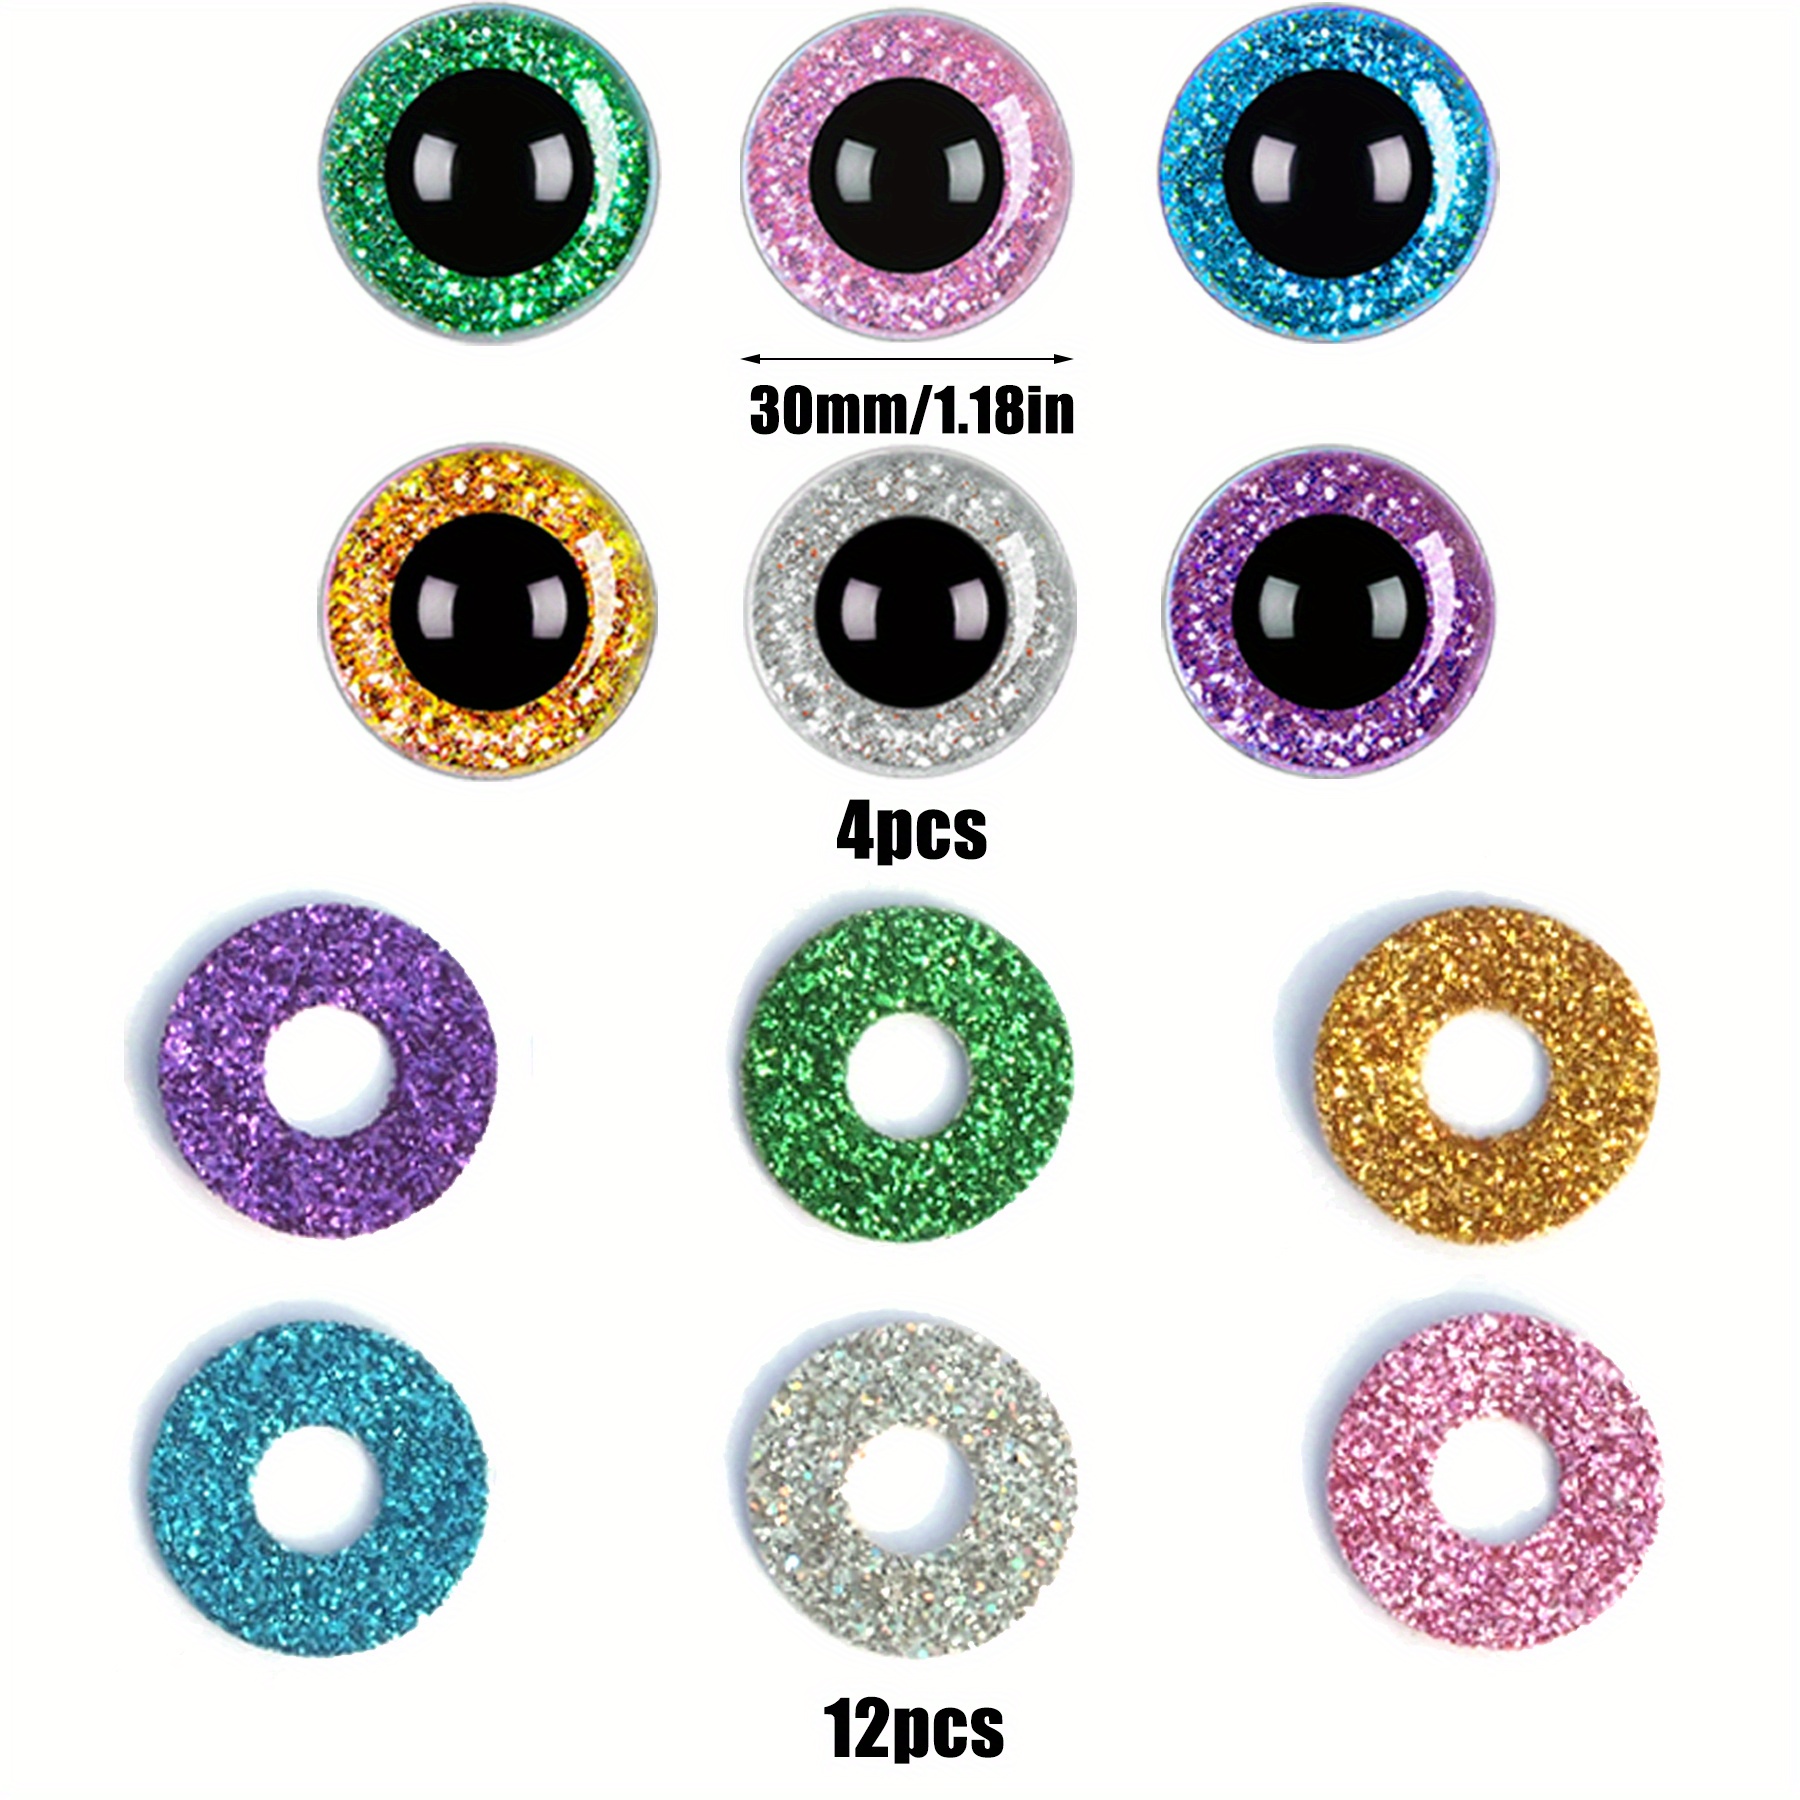 How To Paint Glitter Safety Eyes